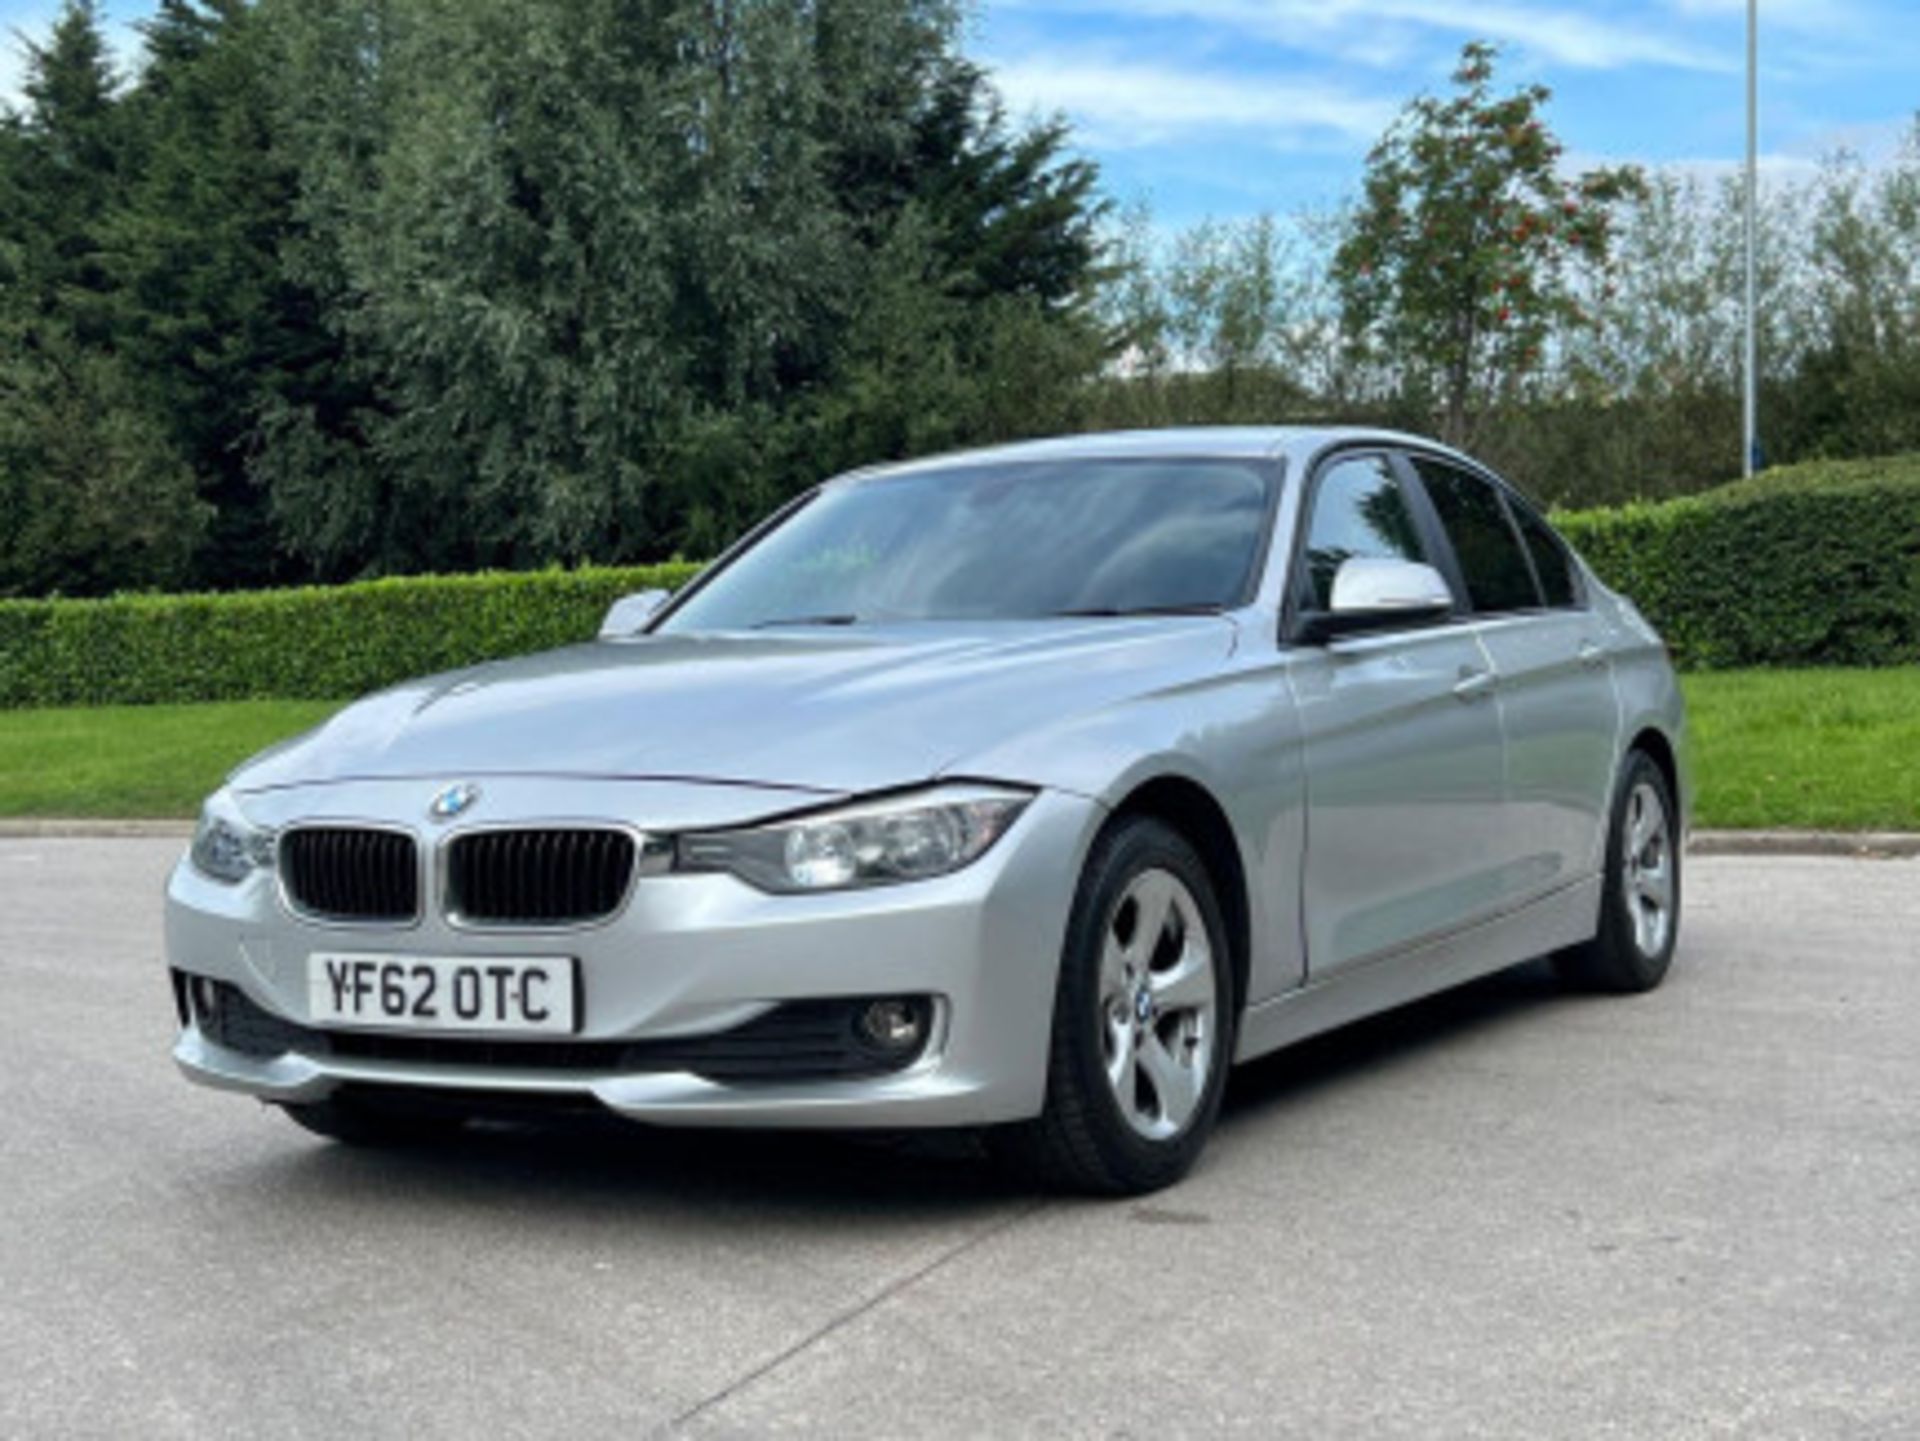 BMW 3 SERIES 2.0 DIESEL ED START STOP - A WELL-MAINTAINED GEM >>--NO VAT ON HAMMER--<< - Image 109 of 229